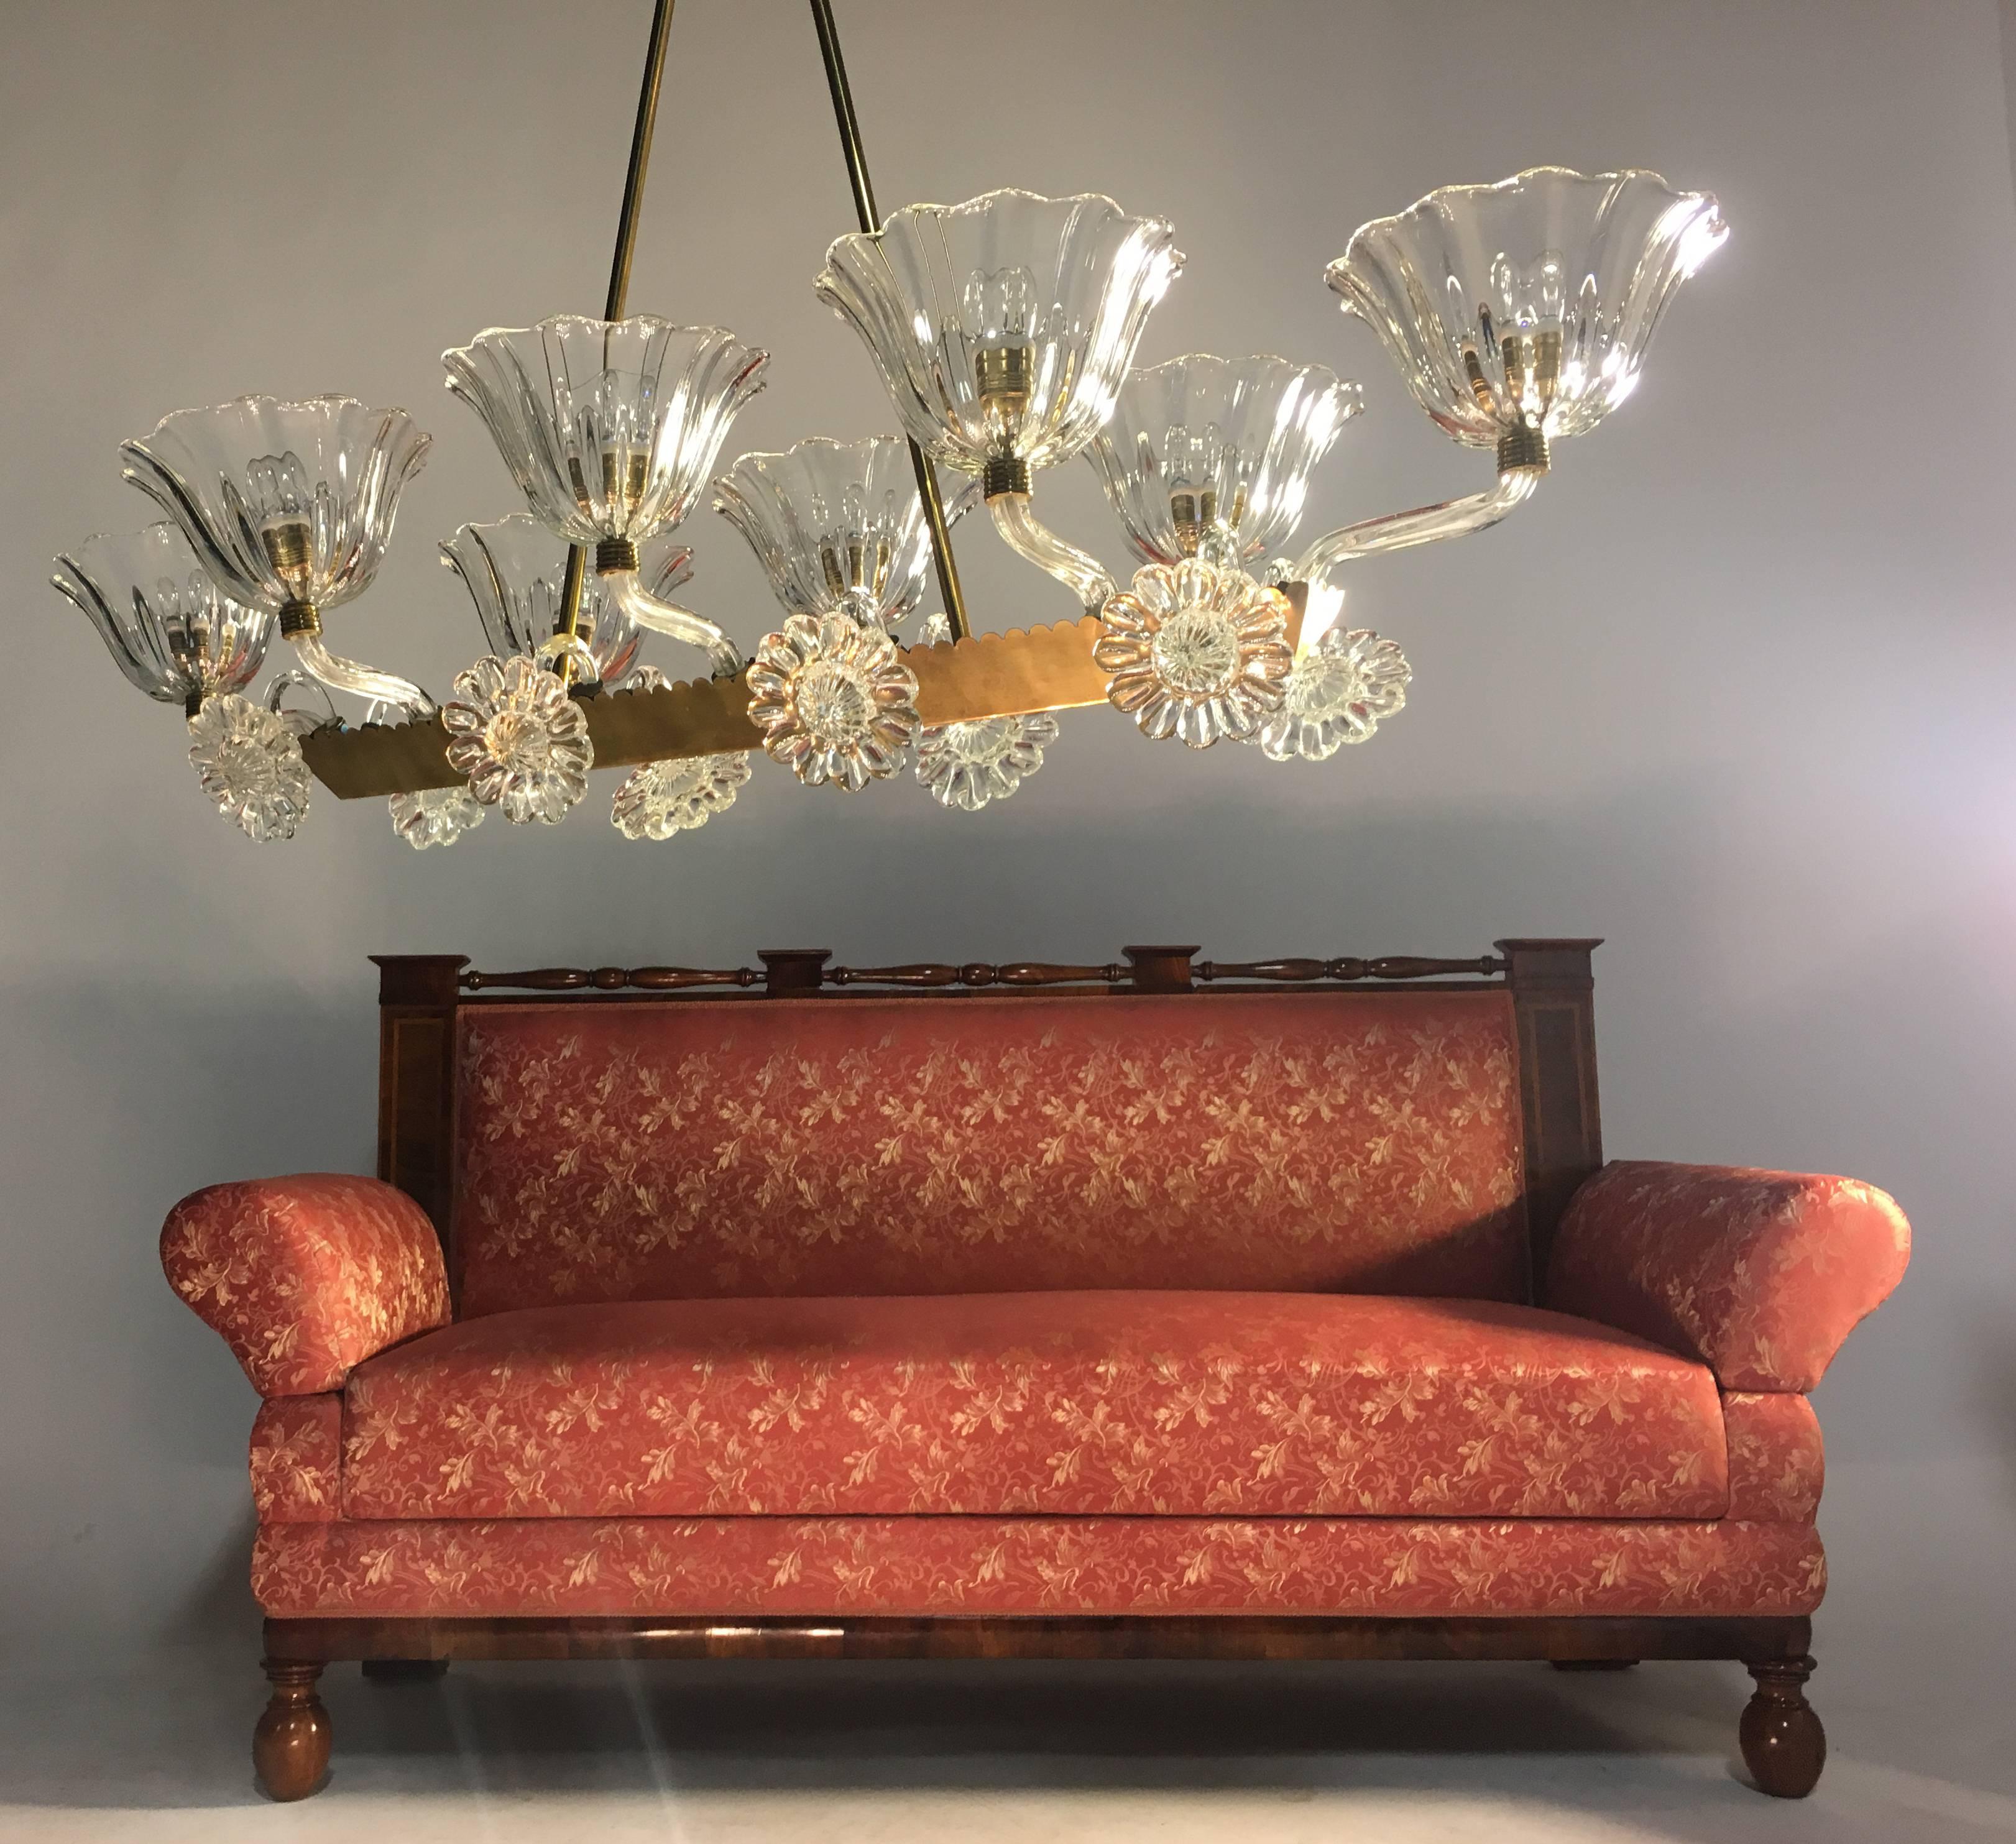 Amazing and elegant hand blown Murano chandelier by Ercole Barovier, circa 1940.
Measure: Diameter cm 120
Height cm 215.
From Private collection.